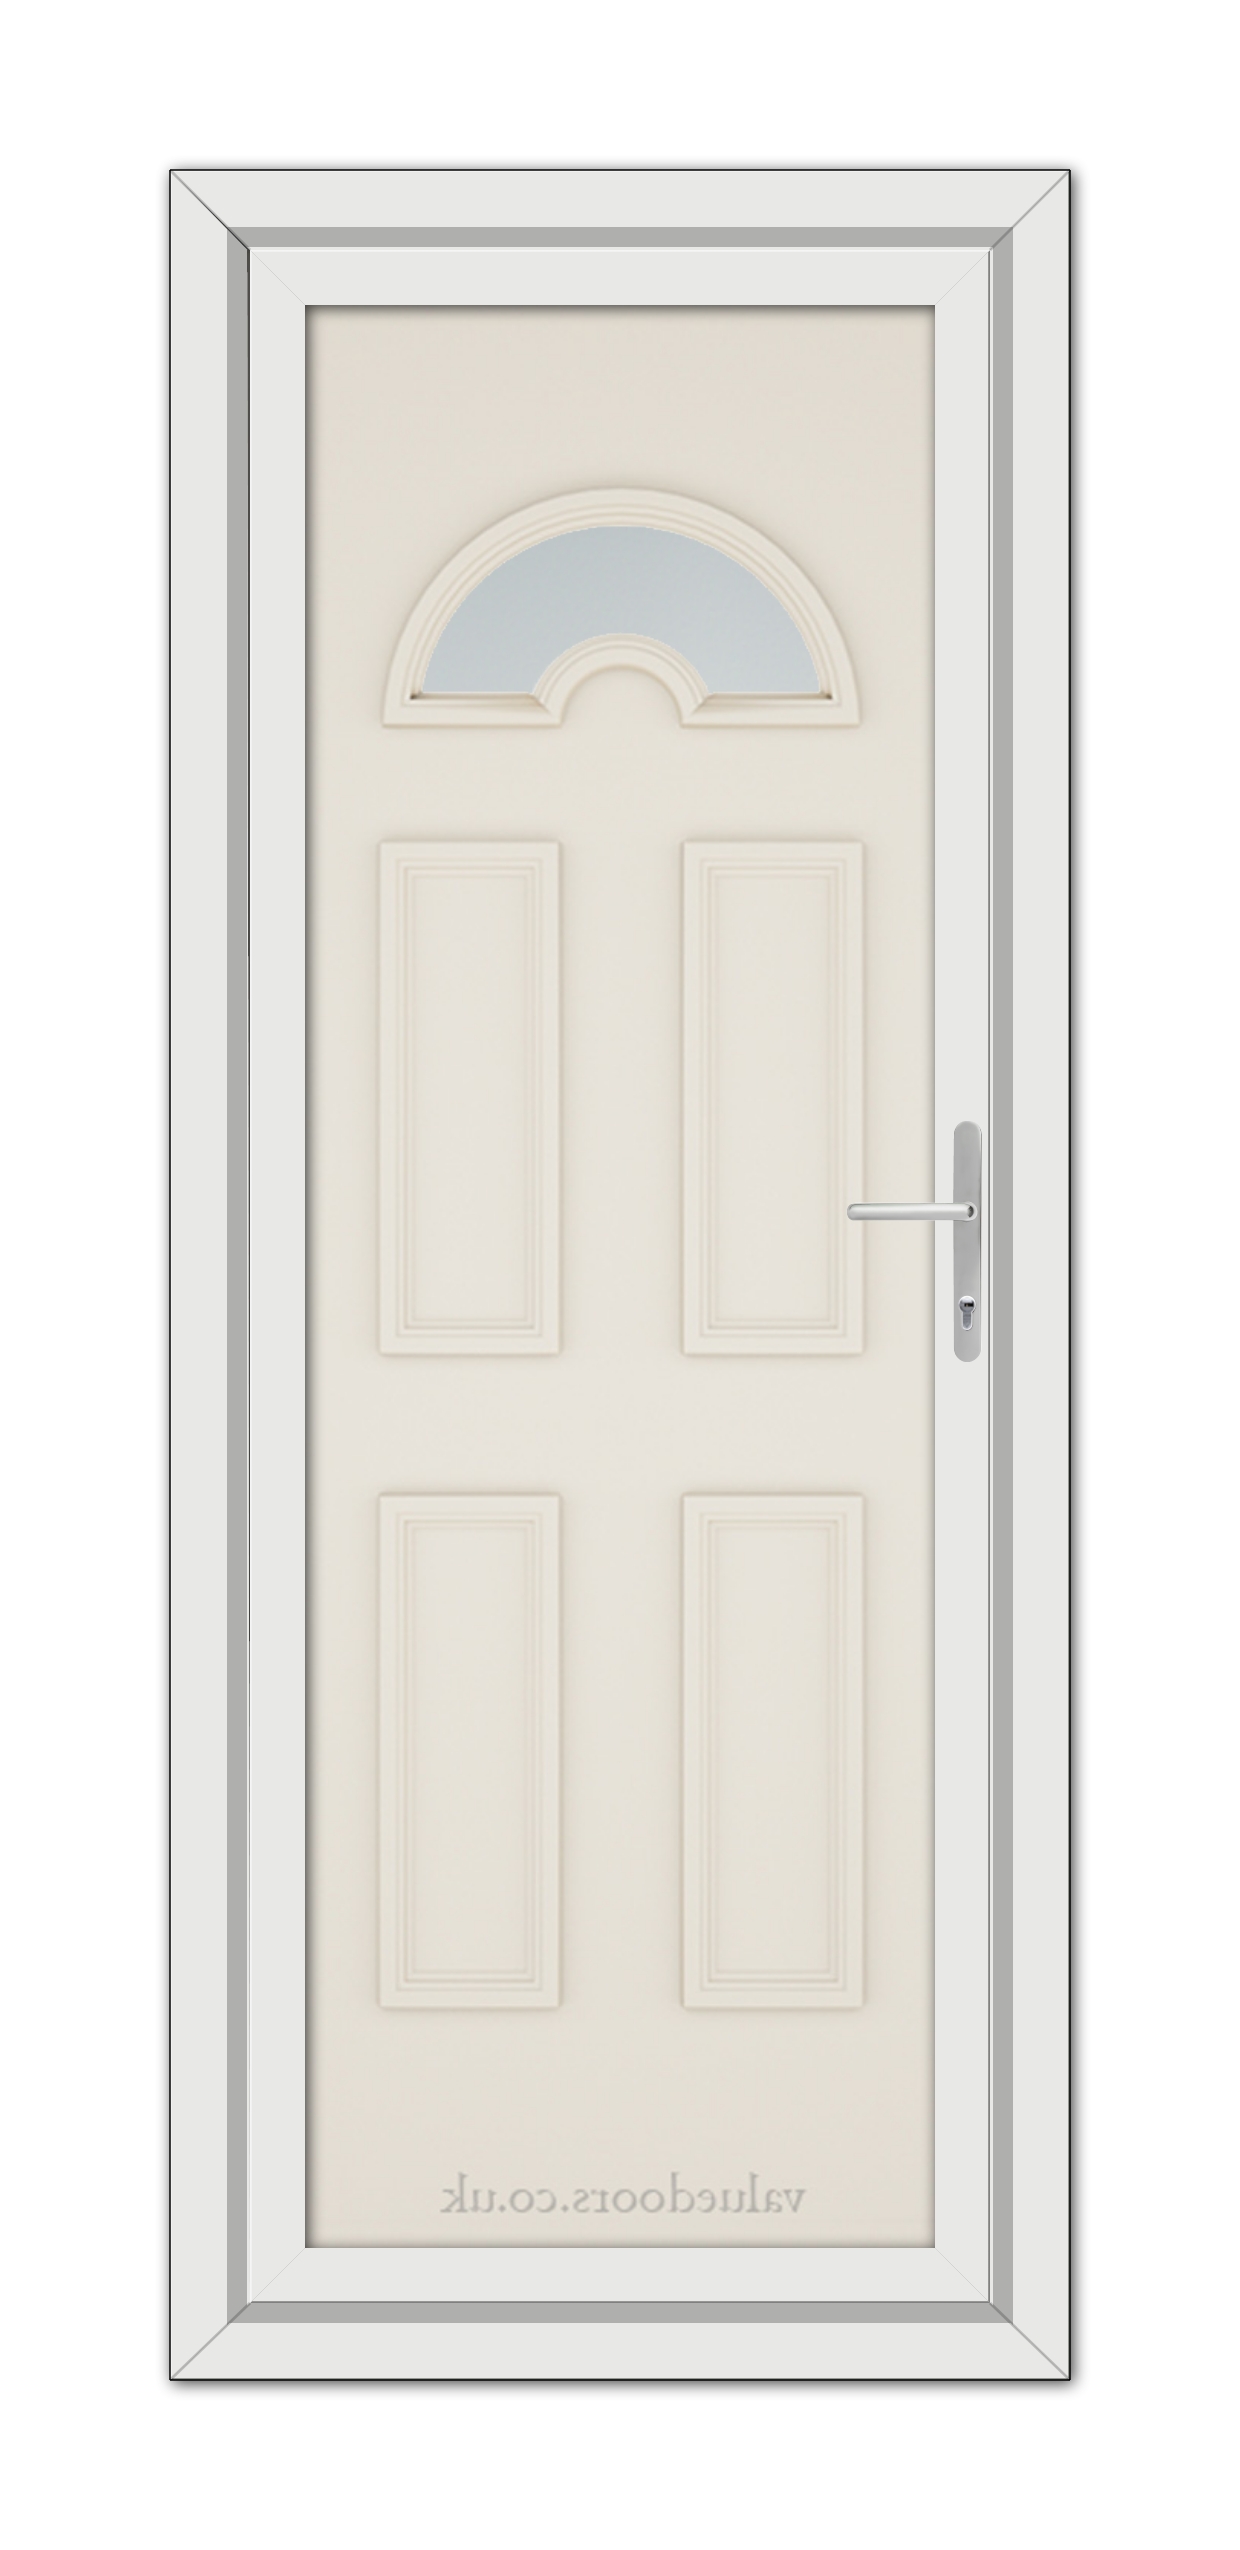 Cream Sandringham uPVC Door: A vertical image of a closed Cream Sandringham uPVC door with six panels and a crescent moon-shaped glass window at the top, set within a grey frame.